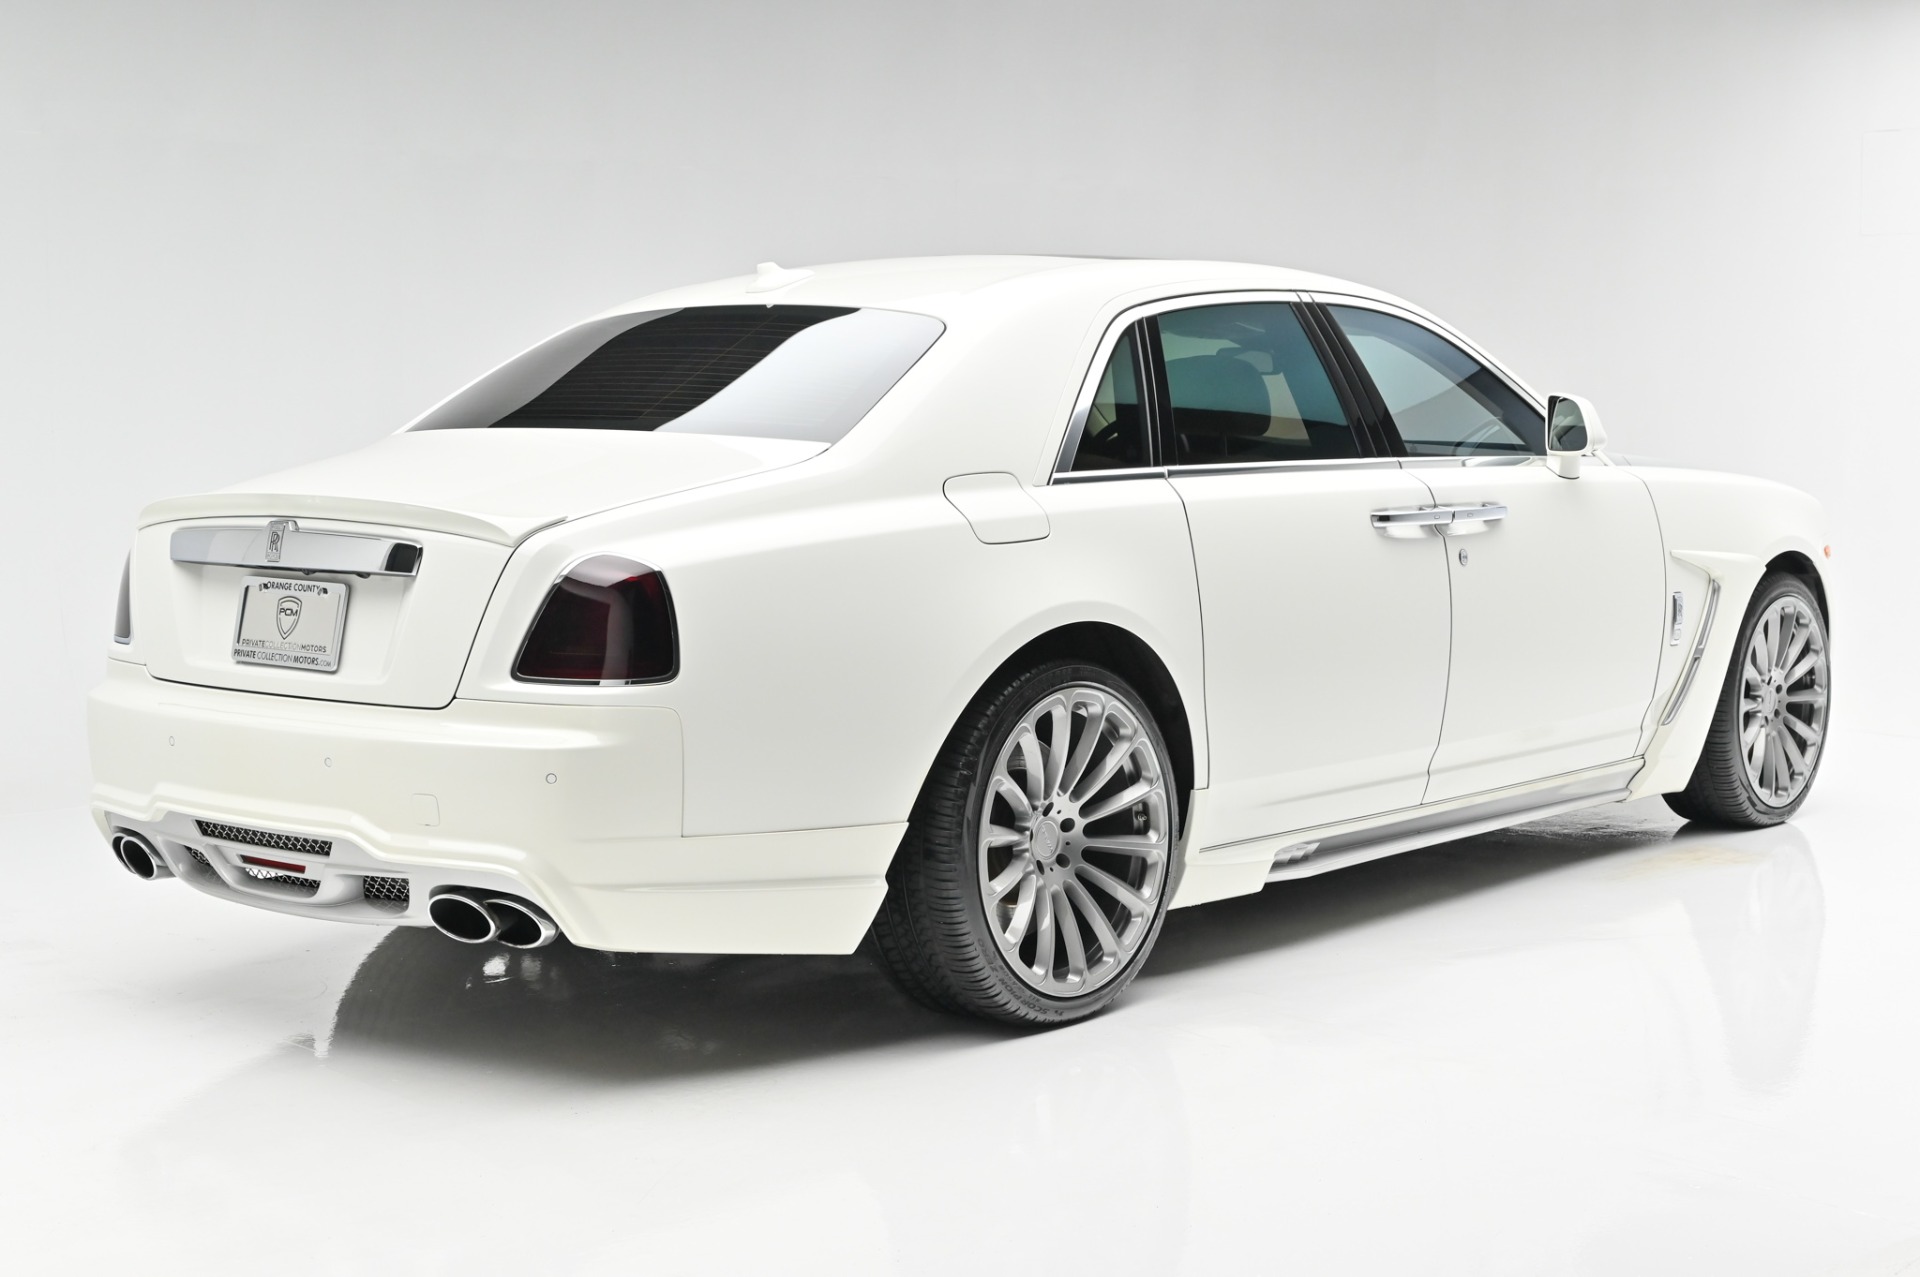 Used 2013 Rolls-Royce Ghost Wald Black Bison Body Kit! For Sale